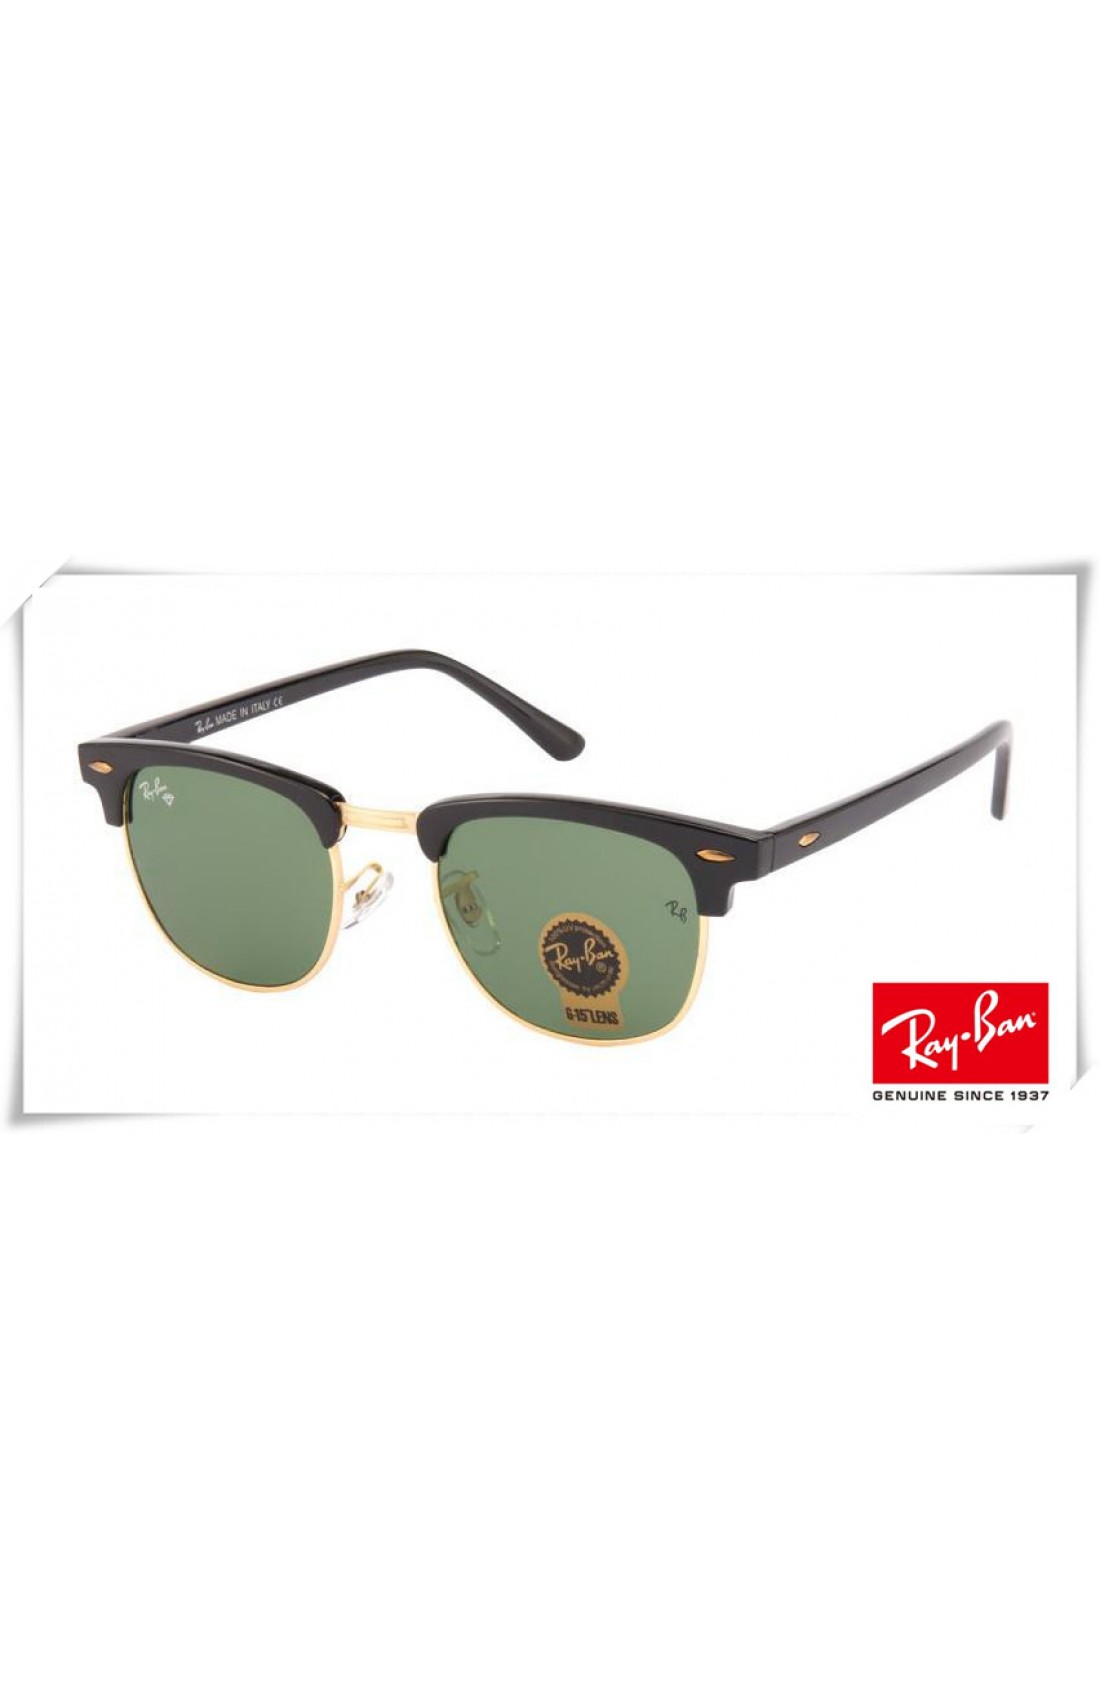 clubmaster gold frame